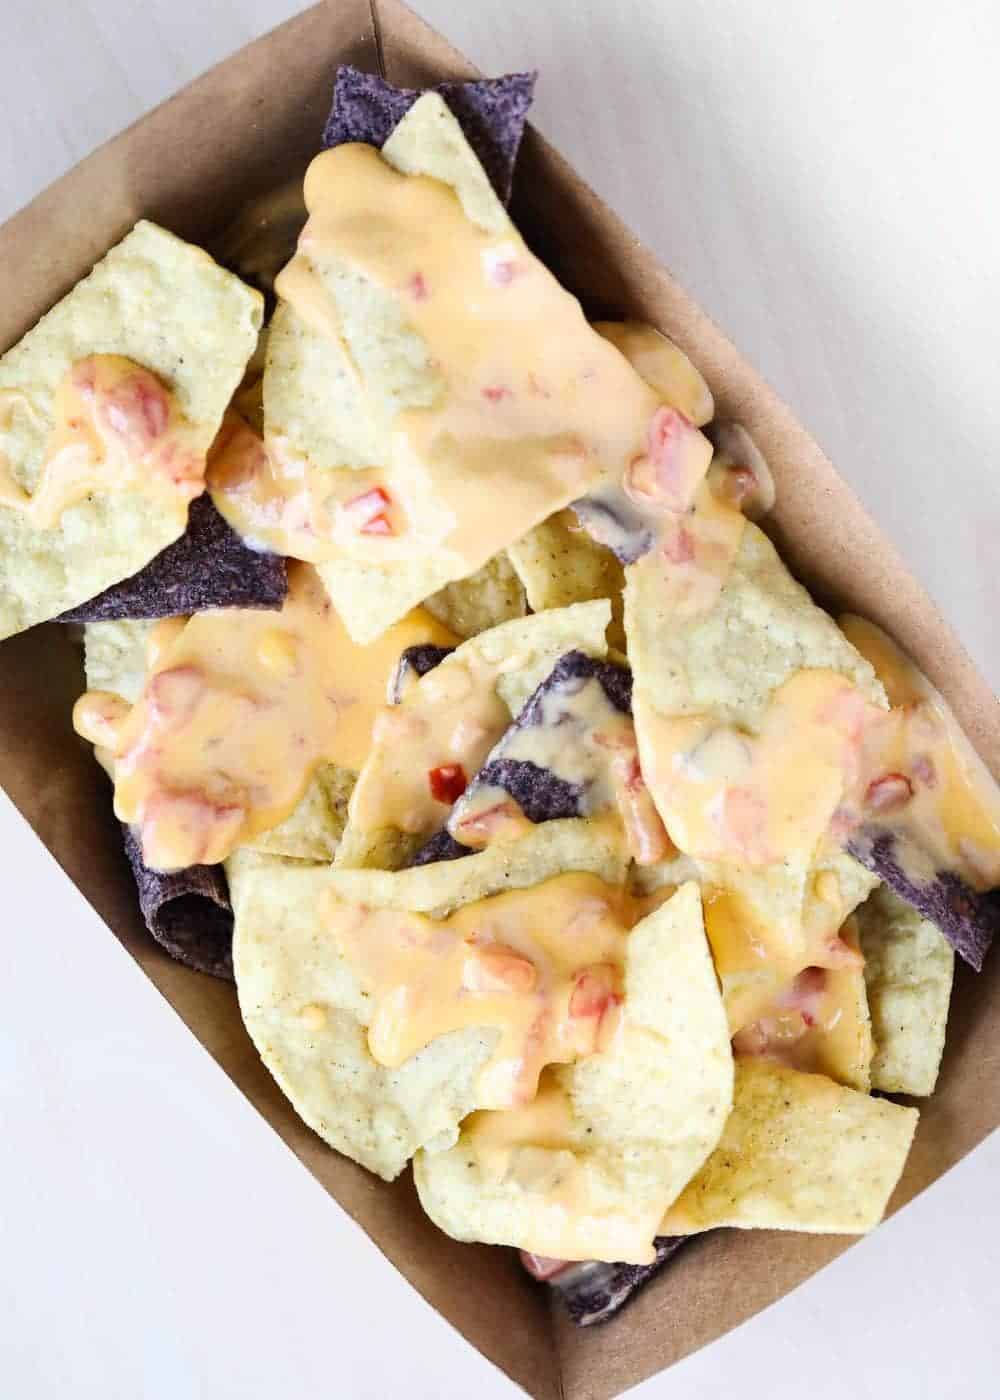 Nachos with famous queso cheese on top.